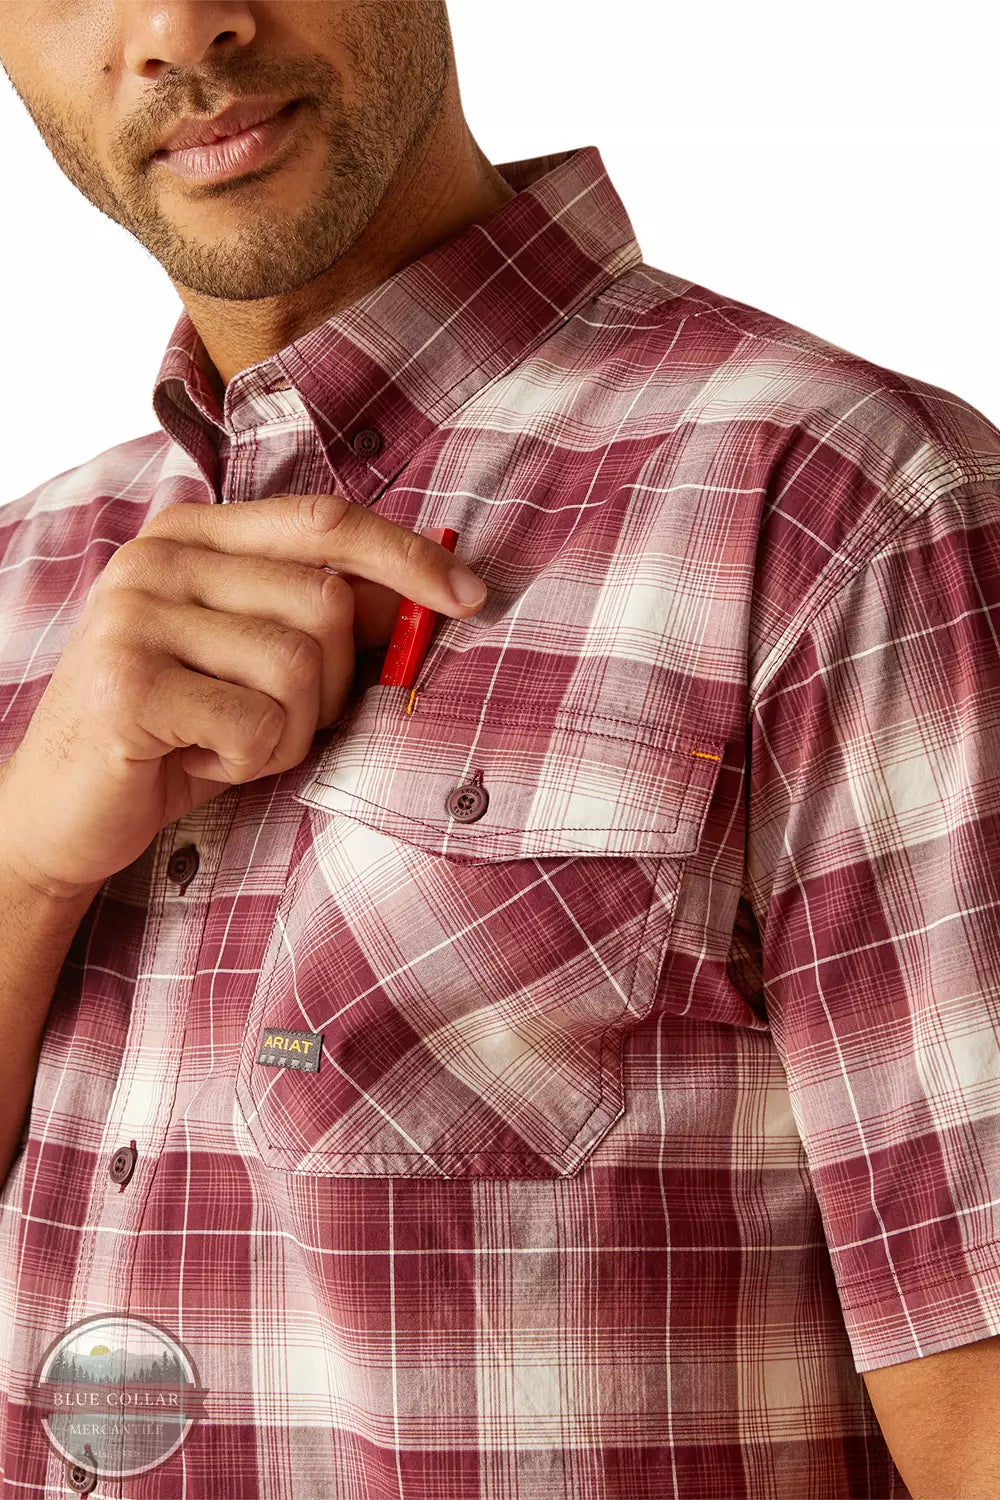 Ariat 10048892 Rebar Made Tough DuraStretch Work Shirt in Roan Rouge Plaid Front Detail View